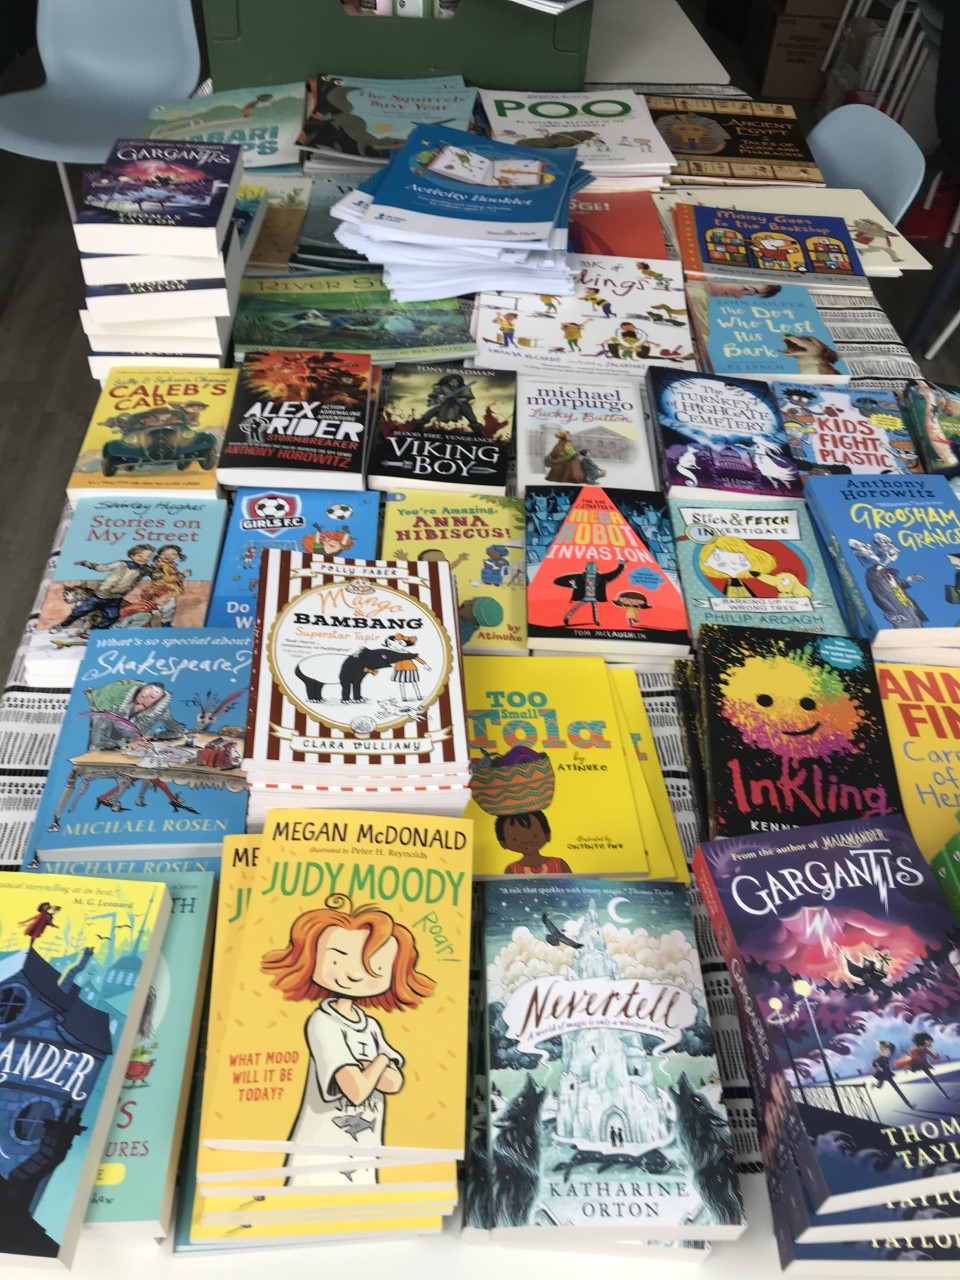 SouthGate gifts hundreds of children's books to local families in need